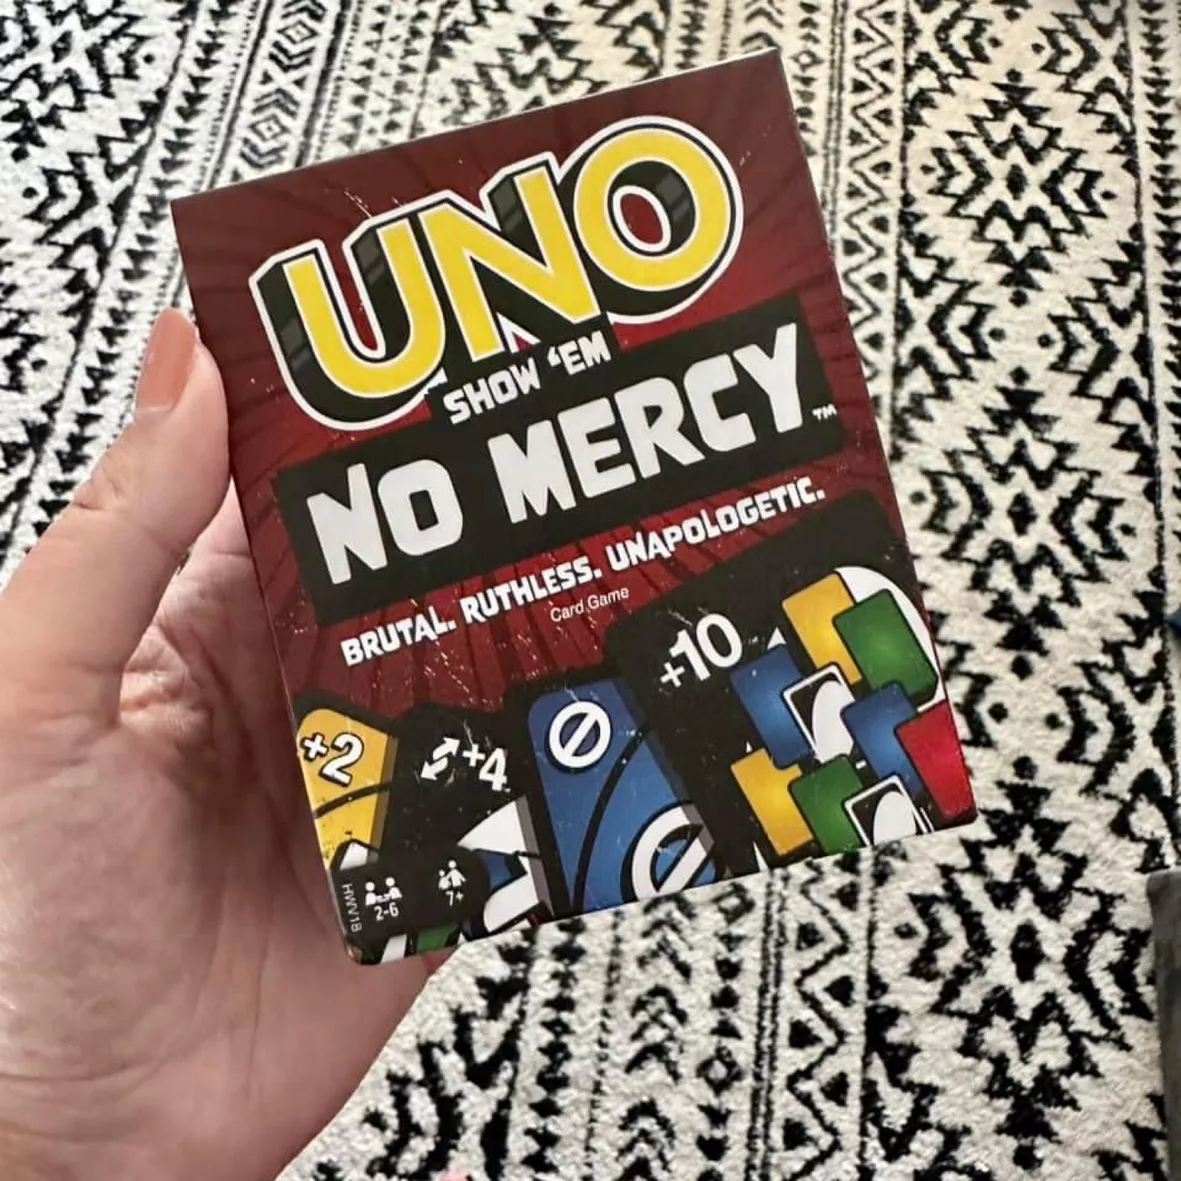 Unbox the new @uno Show 'Em No Mercy game with me. Found this at my lo, uno  no mercy